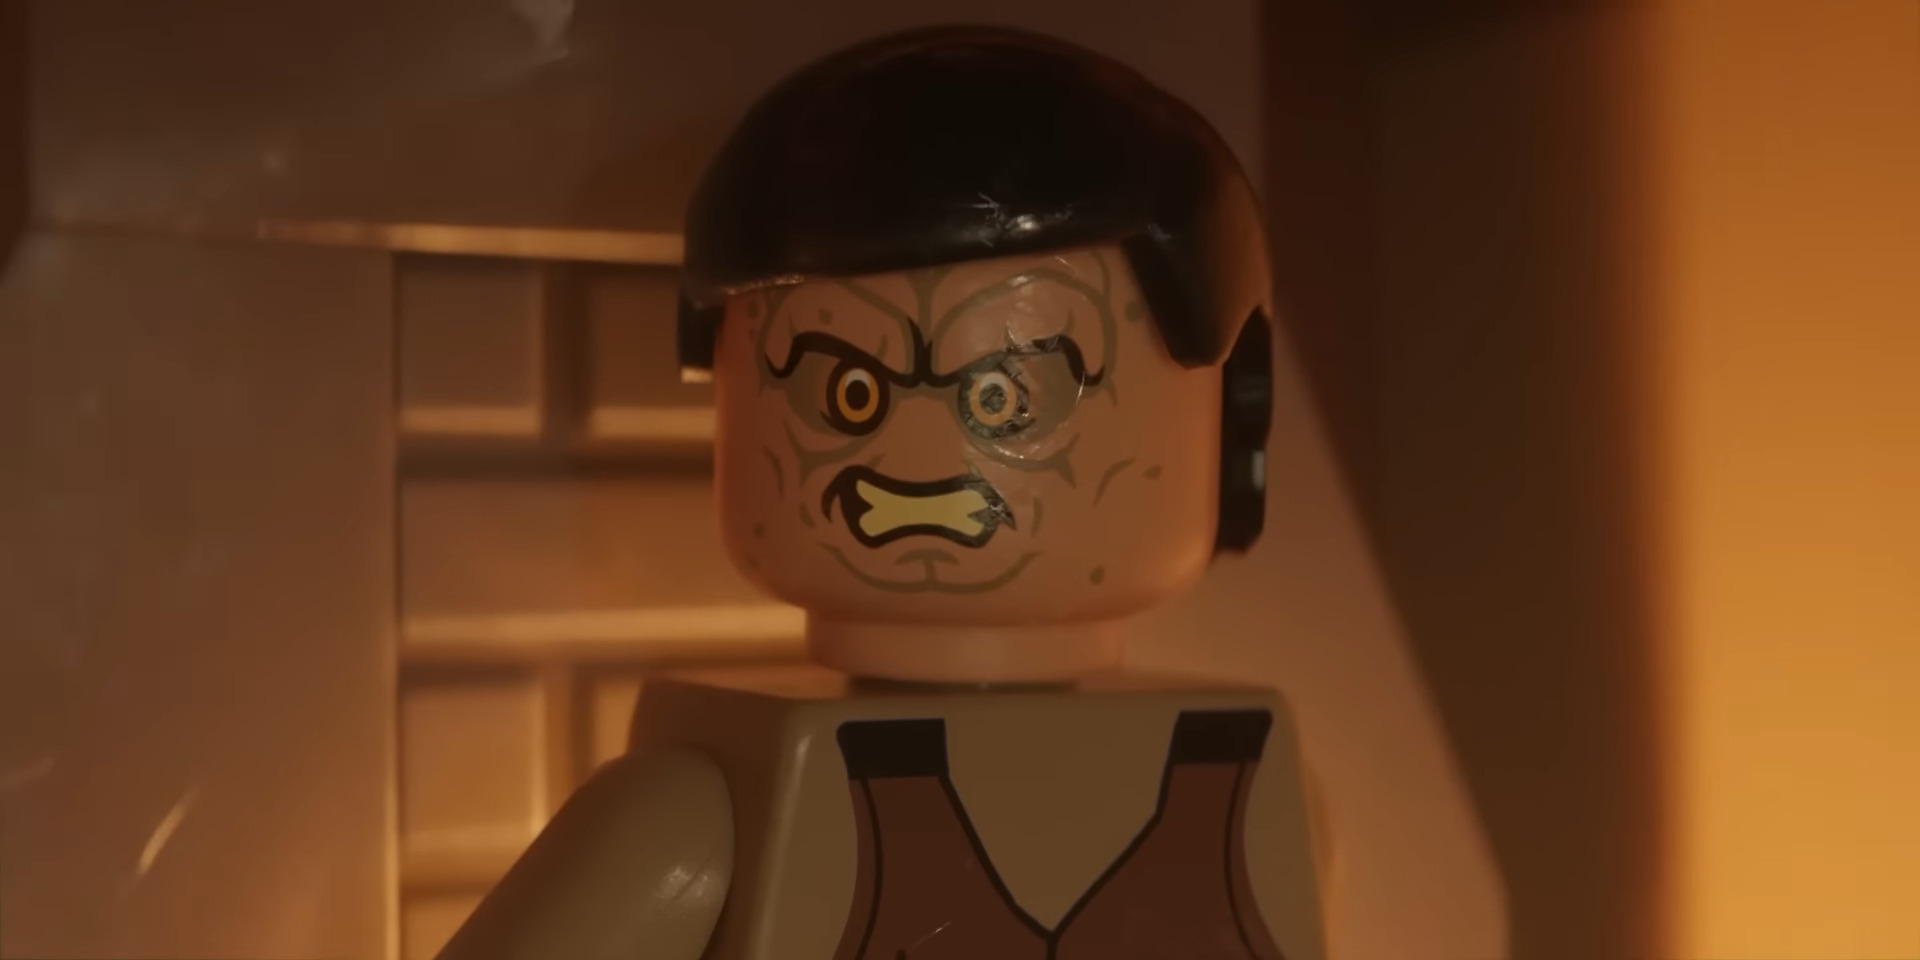  The only Resident Evil 4 remake I need is this incredible Lego version 